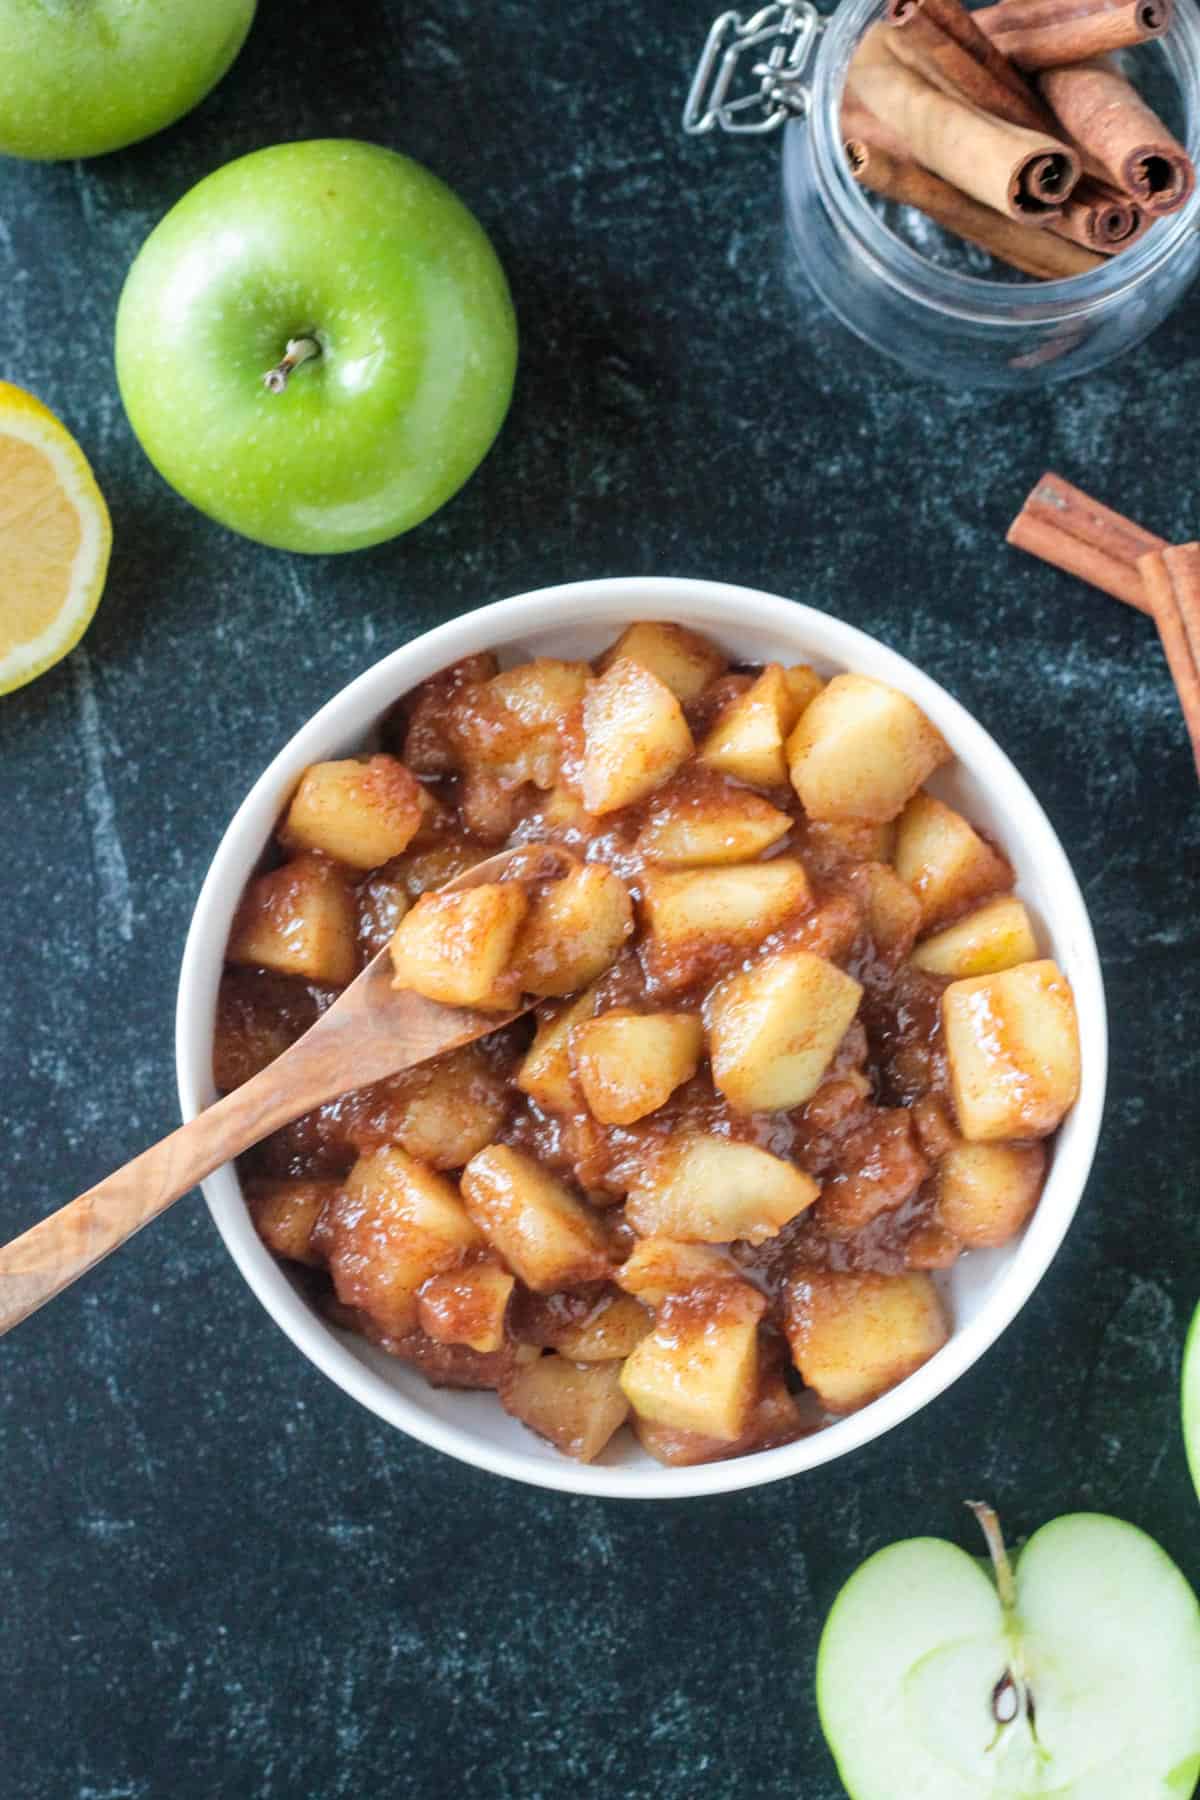 Small wooden spoon scooping up stovetop cinnamon apples from a bowl.